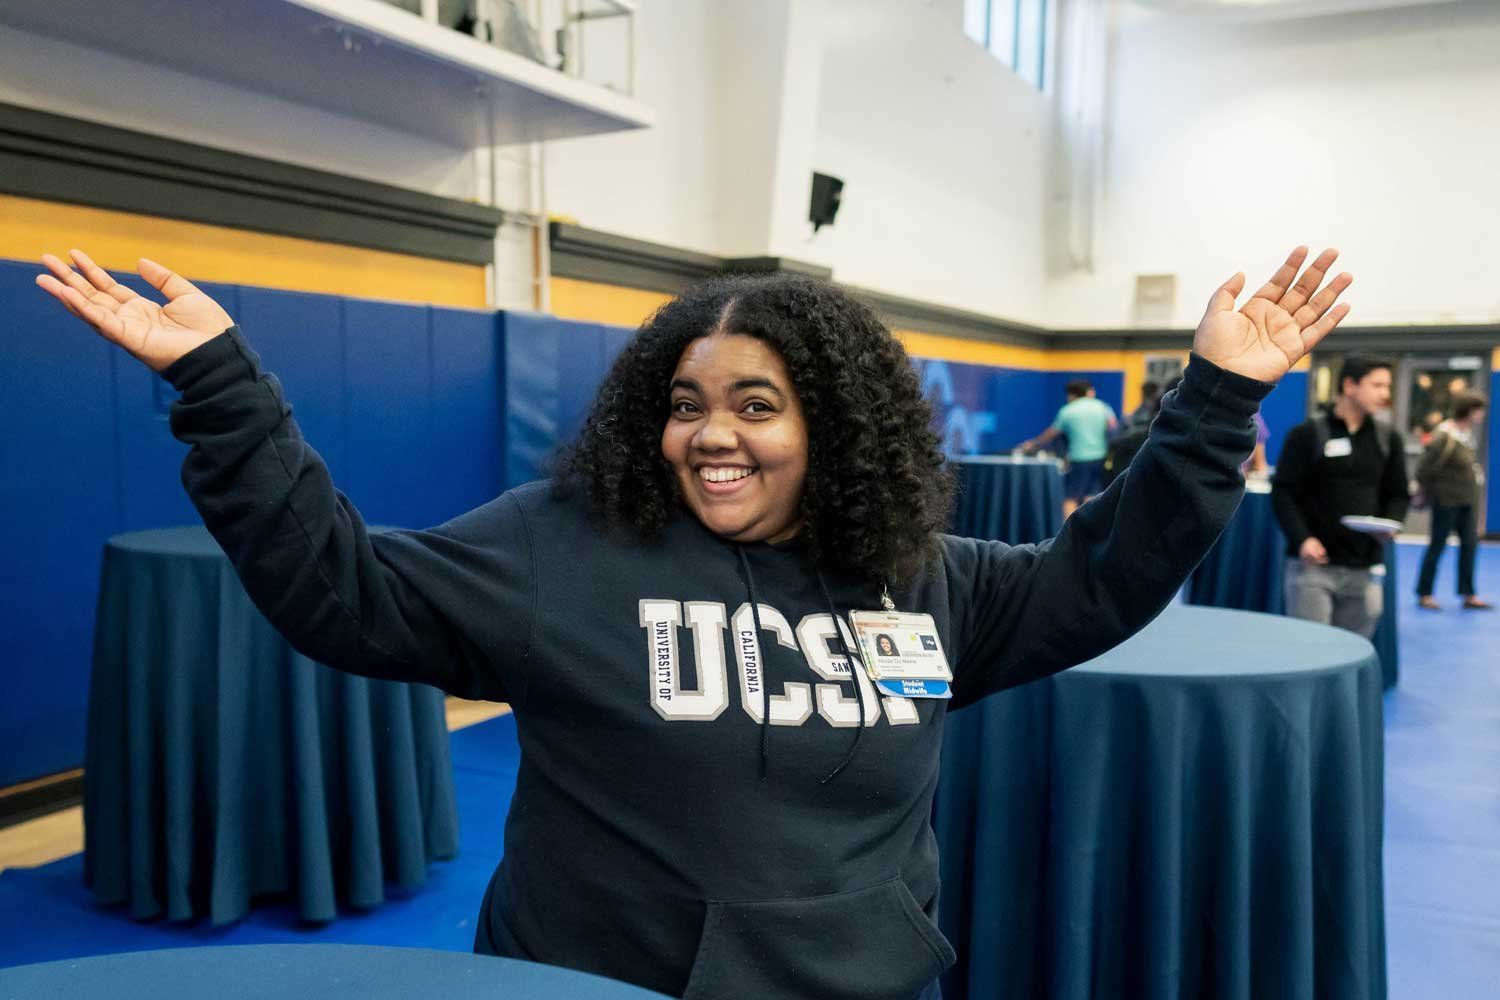 A nursing student wearing a sweatshirt with the UCSF logo smiles and stretches out her hands to pose for a photo.